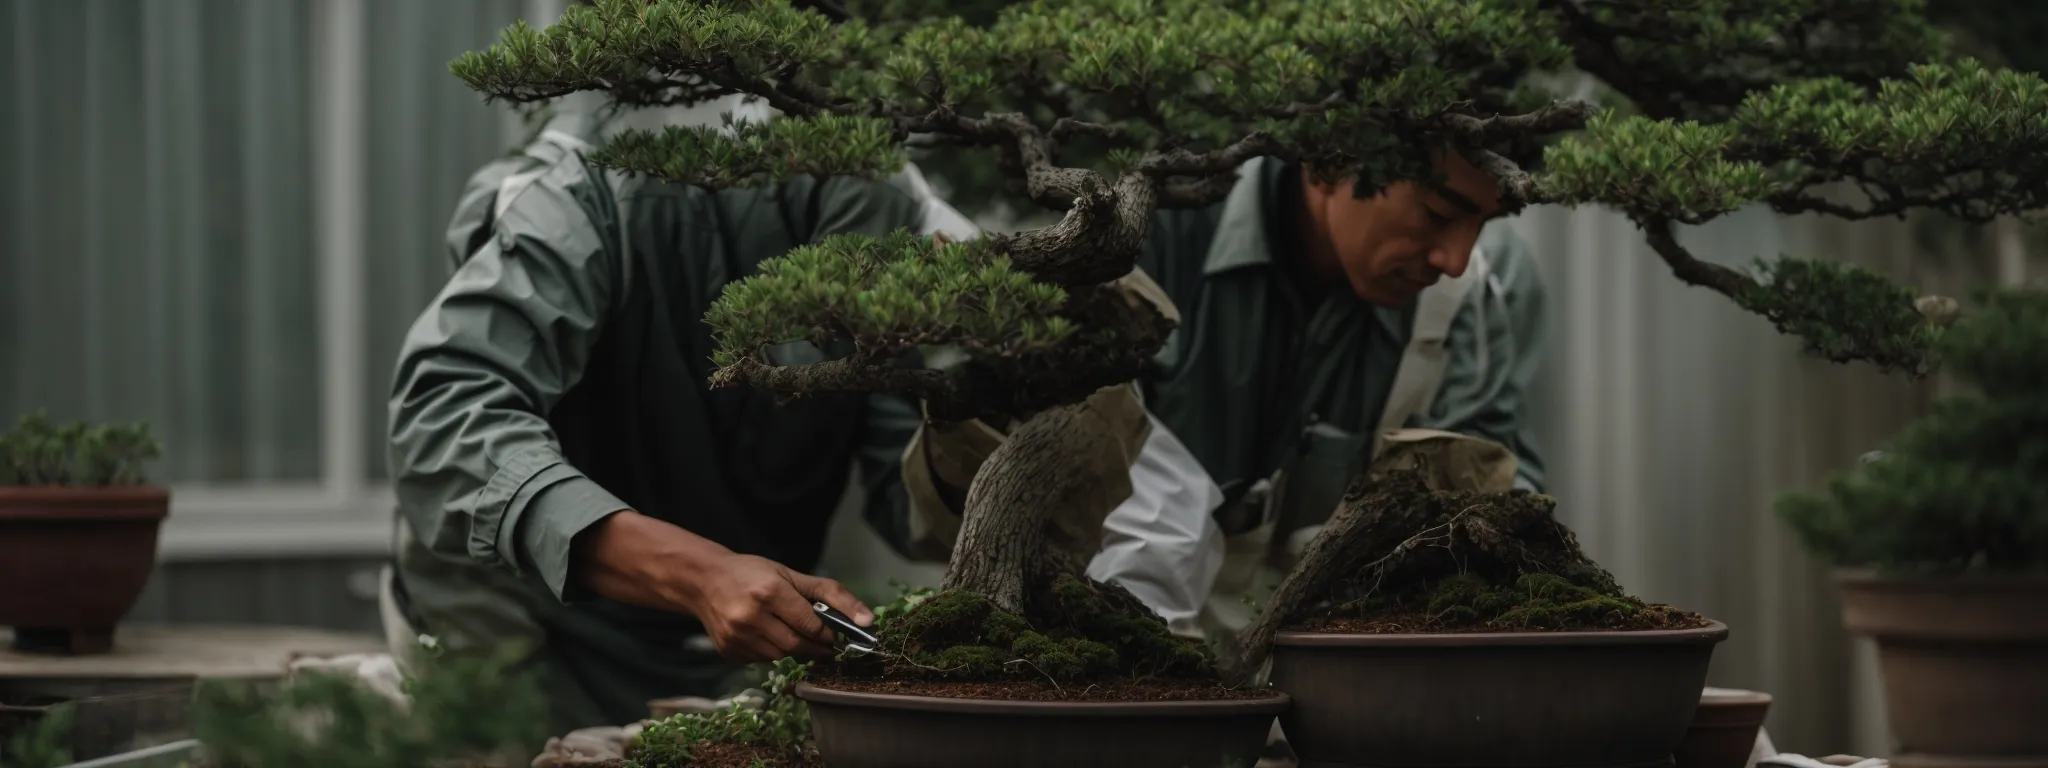 a gardener carefully snipping away at a bonsai tree to shape and improve its growth.